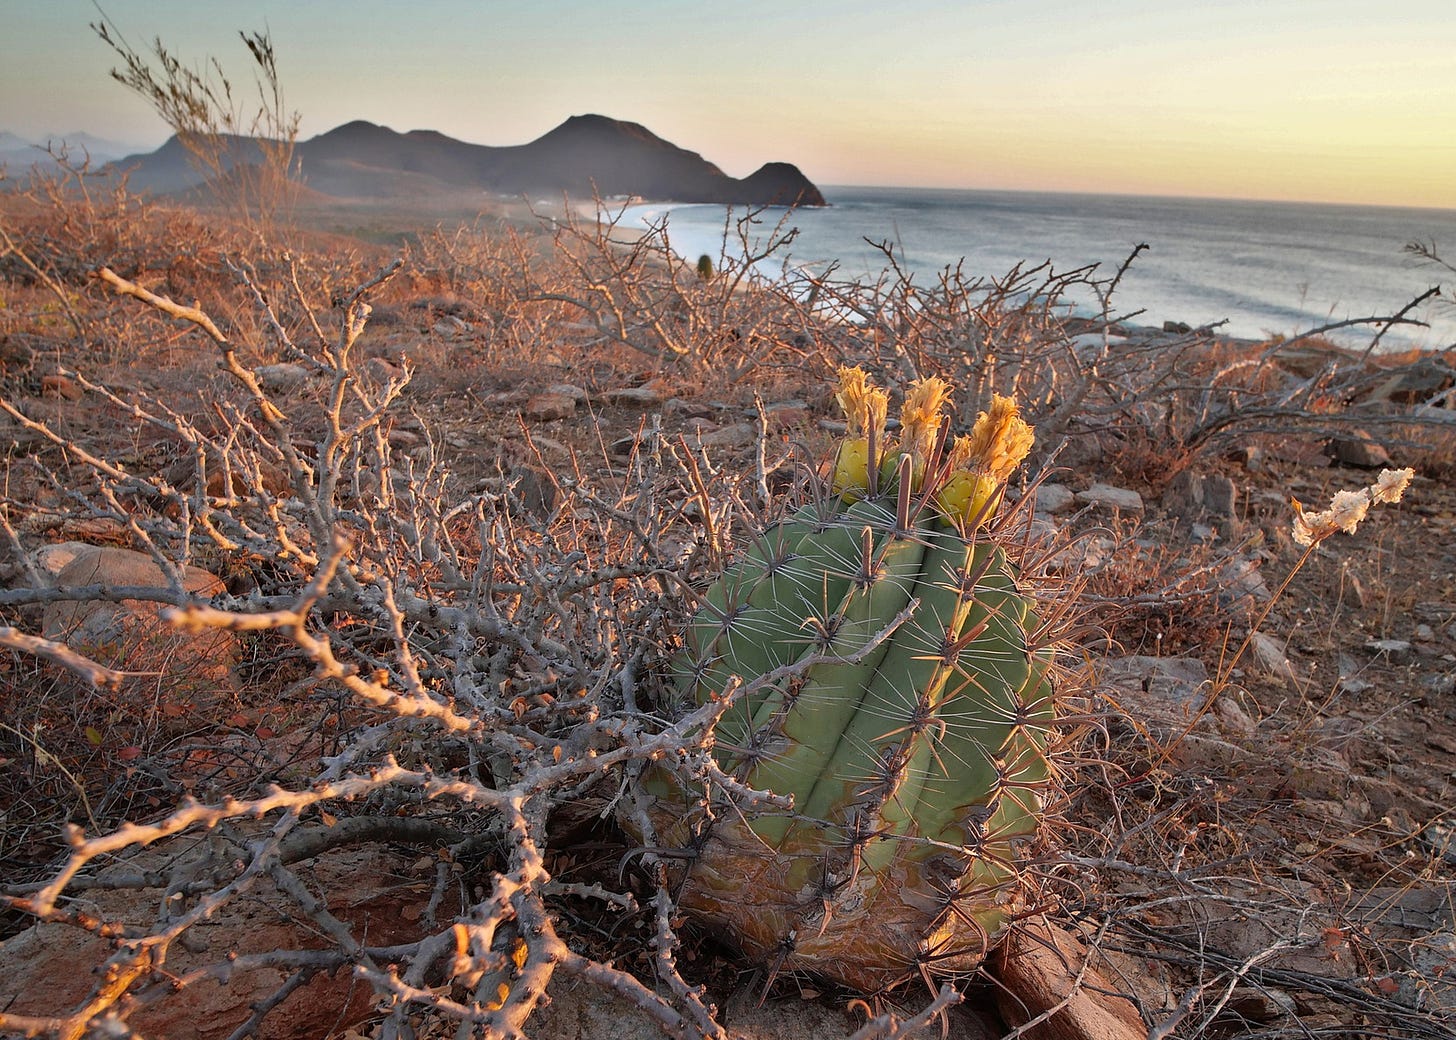 A small, oblong cactus with yellow blossoms grows on a hillside with a sea in the background.